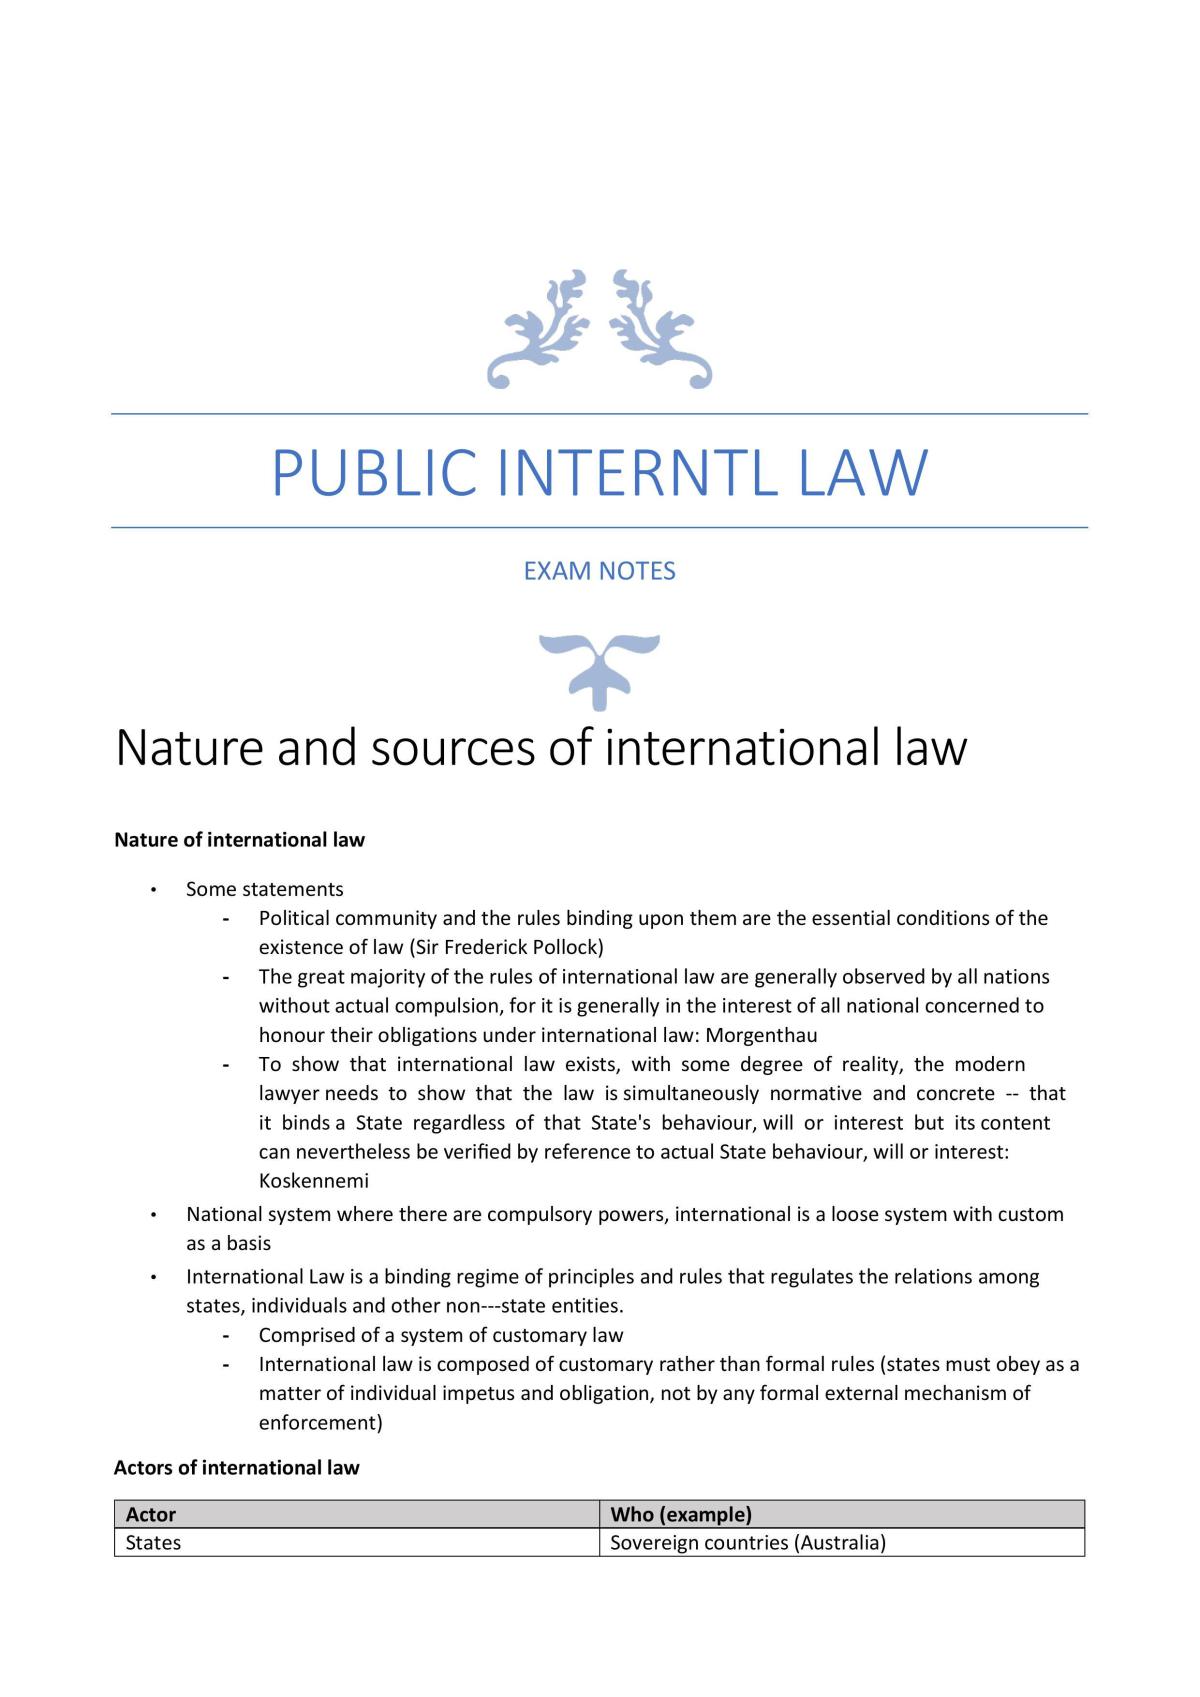 Public International Law - Exam Notes - Page 1